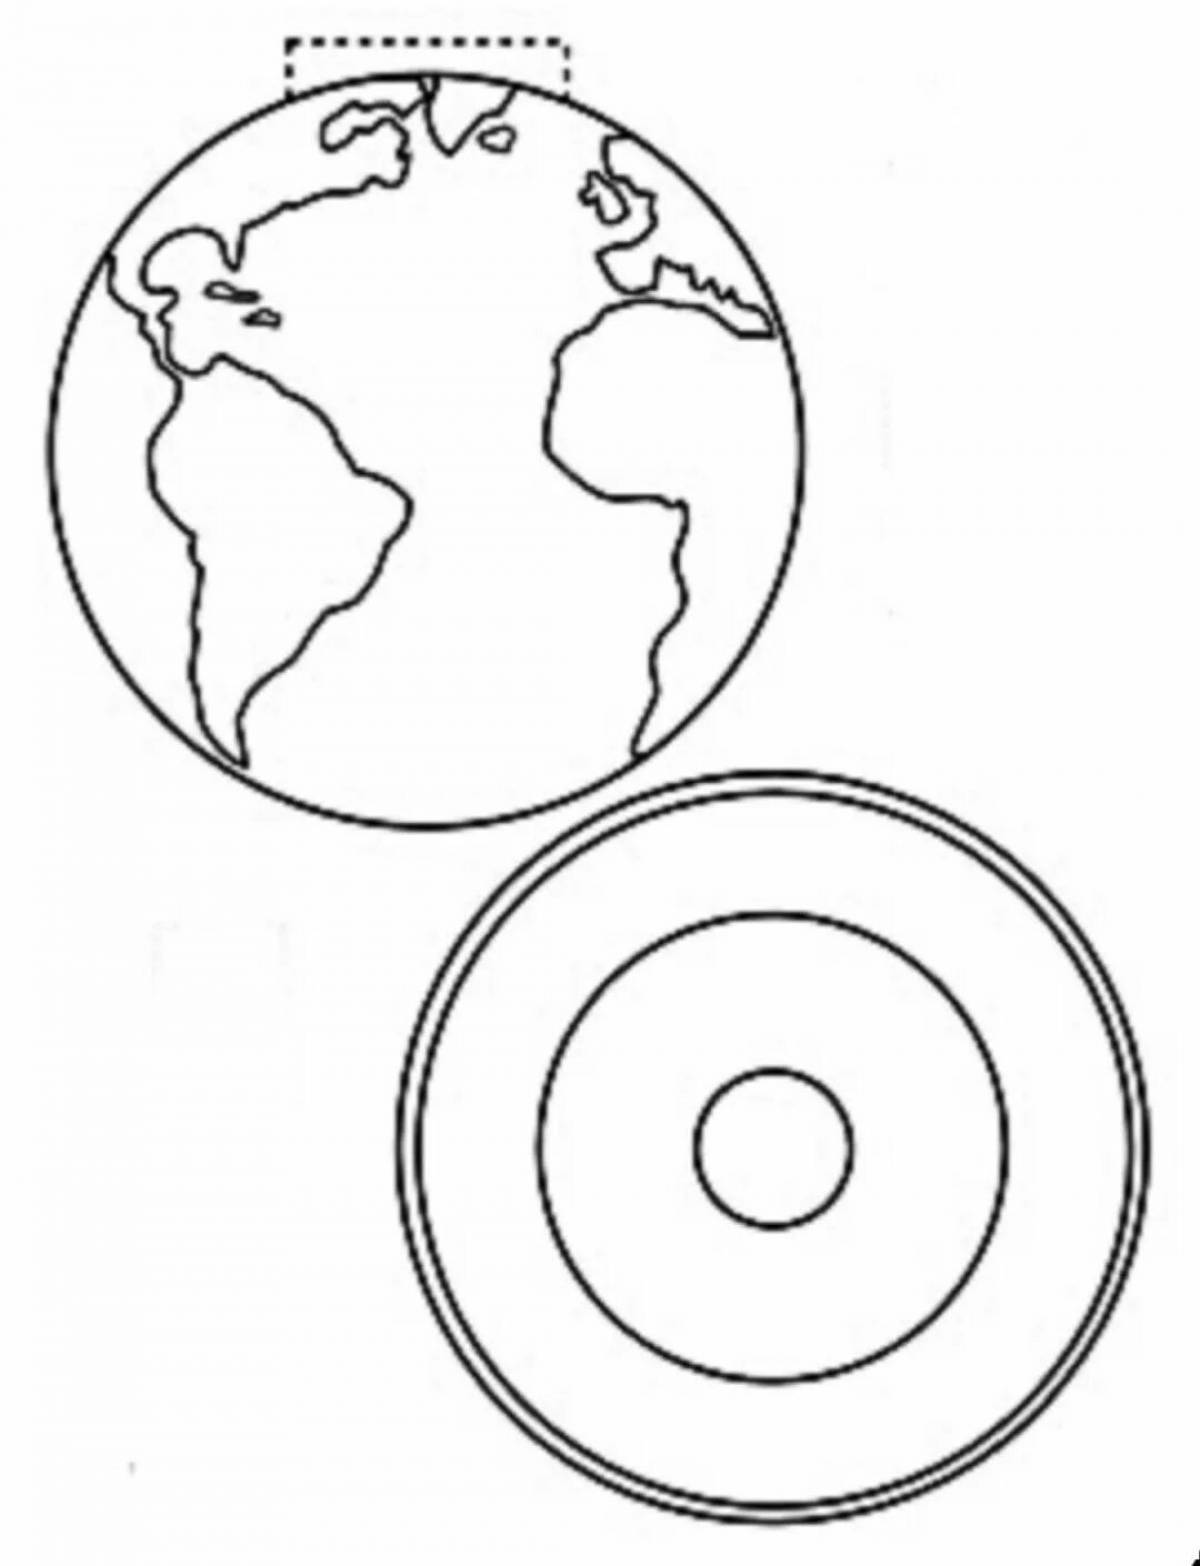 Coloring page of living earth structure